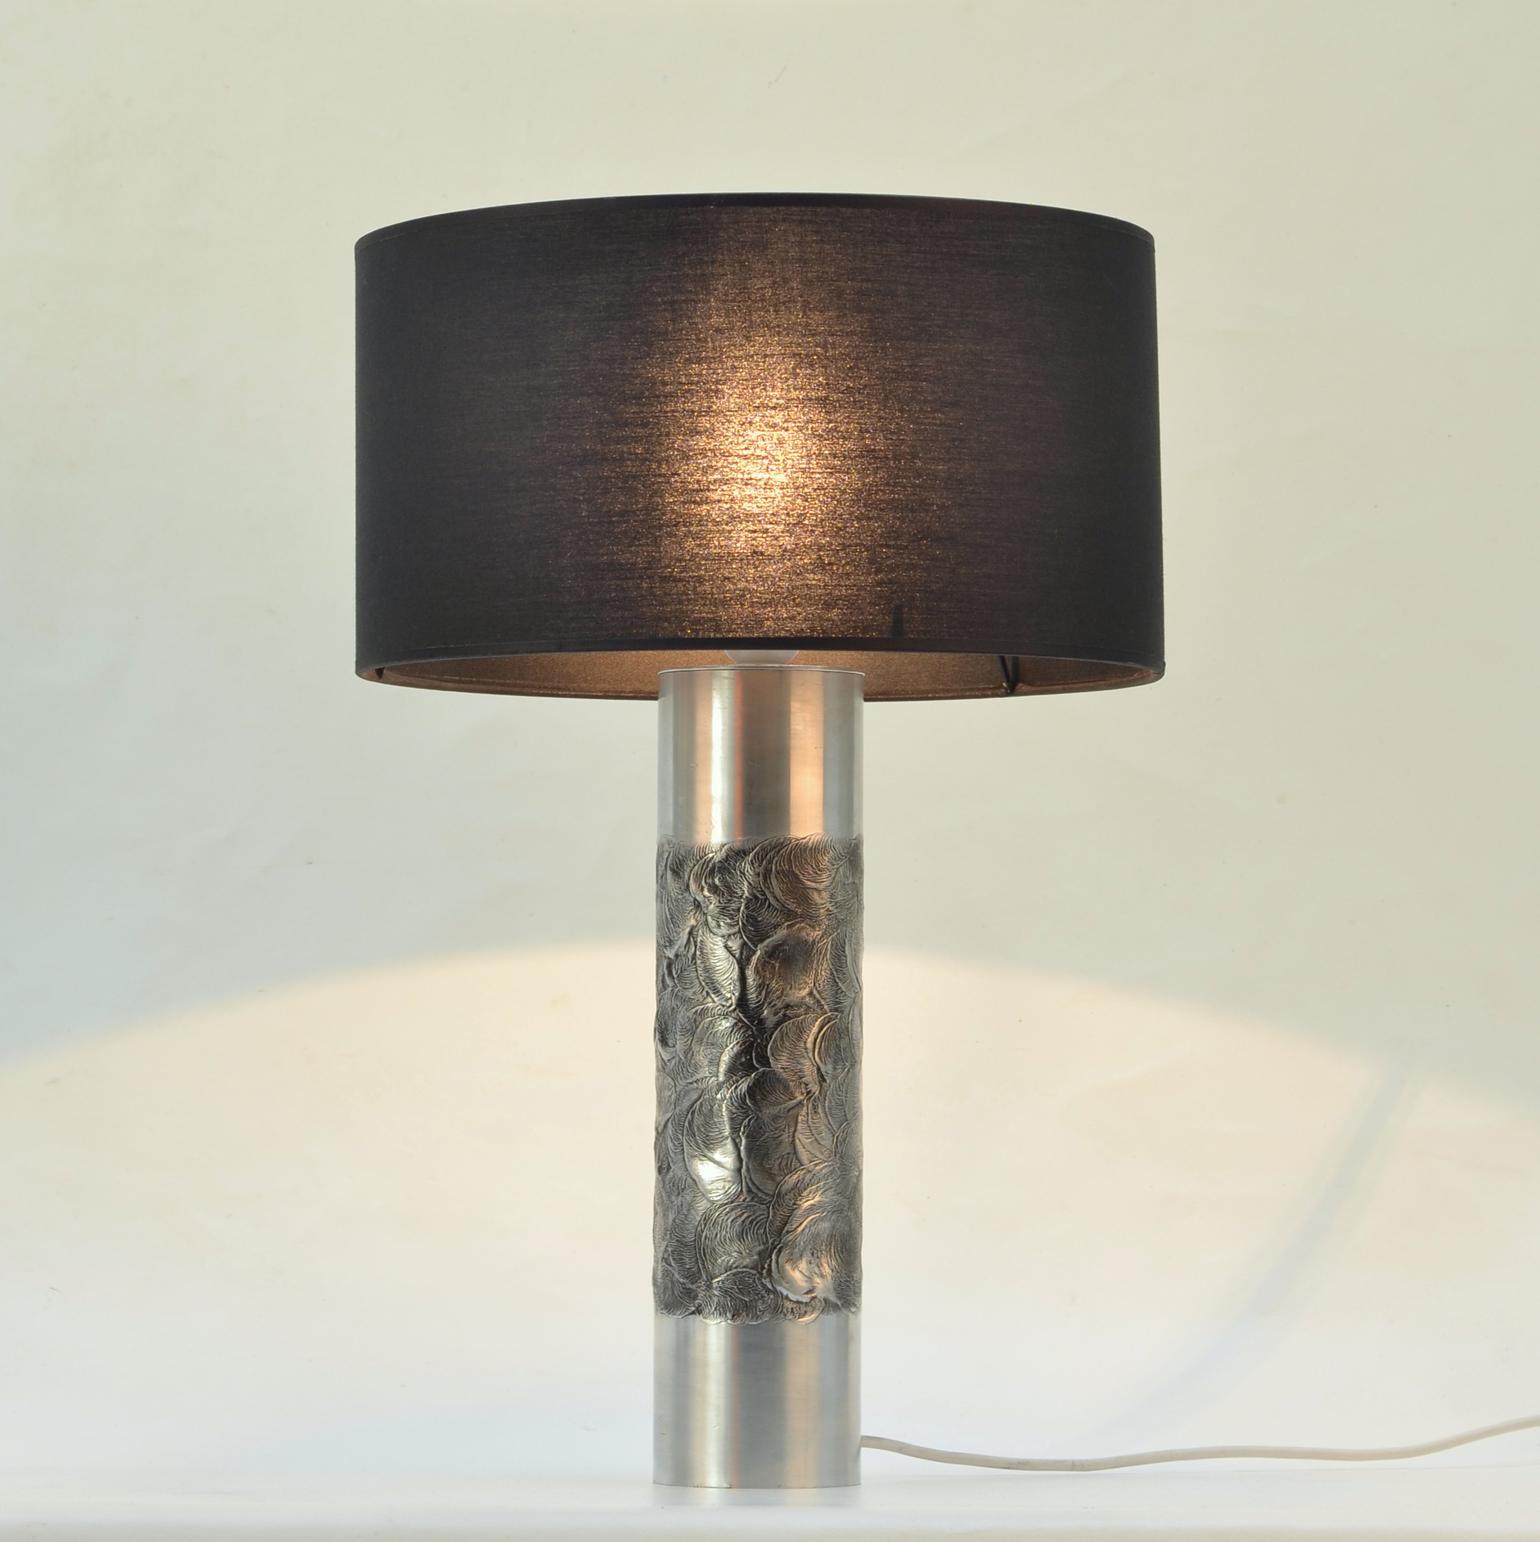 Pair of Brutalist Aluminum Table Lamp by Willy Luyckx, Aluclair, 1960's For Sale 4